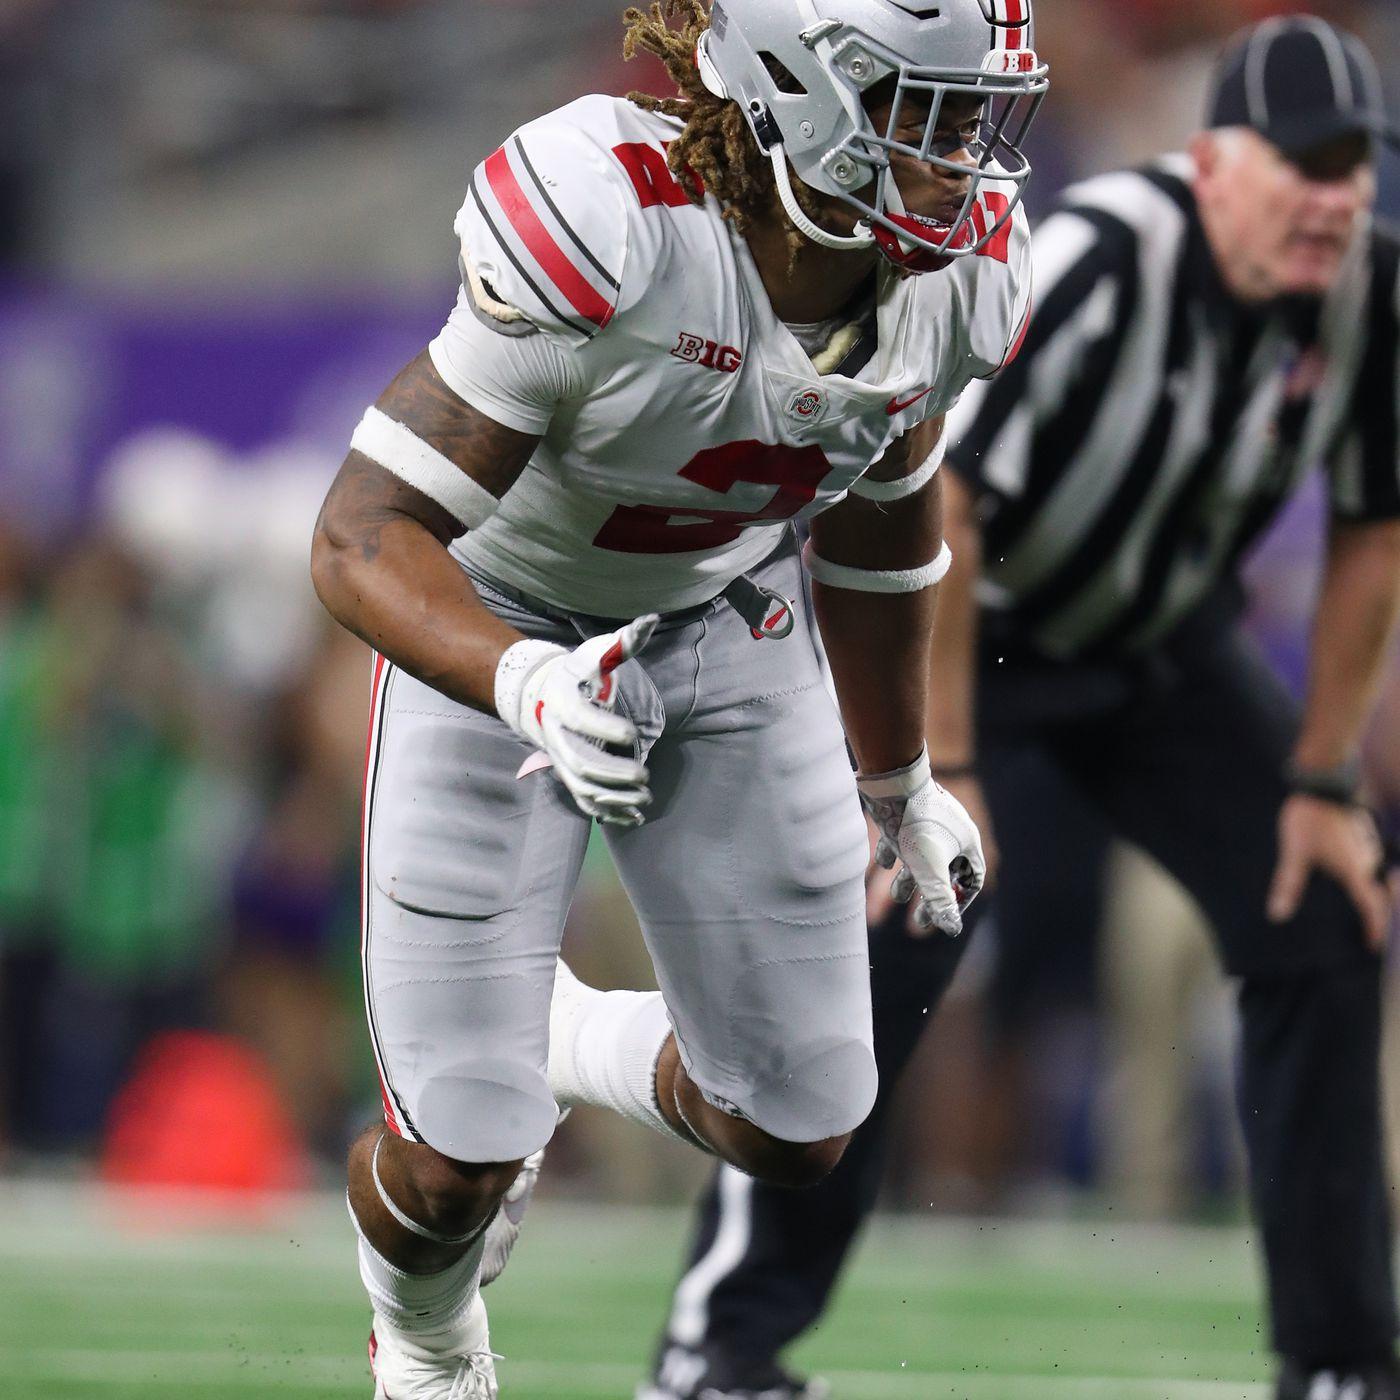 Chase Young Is Already The Star Of The 2020 NFL Draft Grant